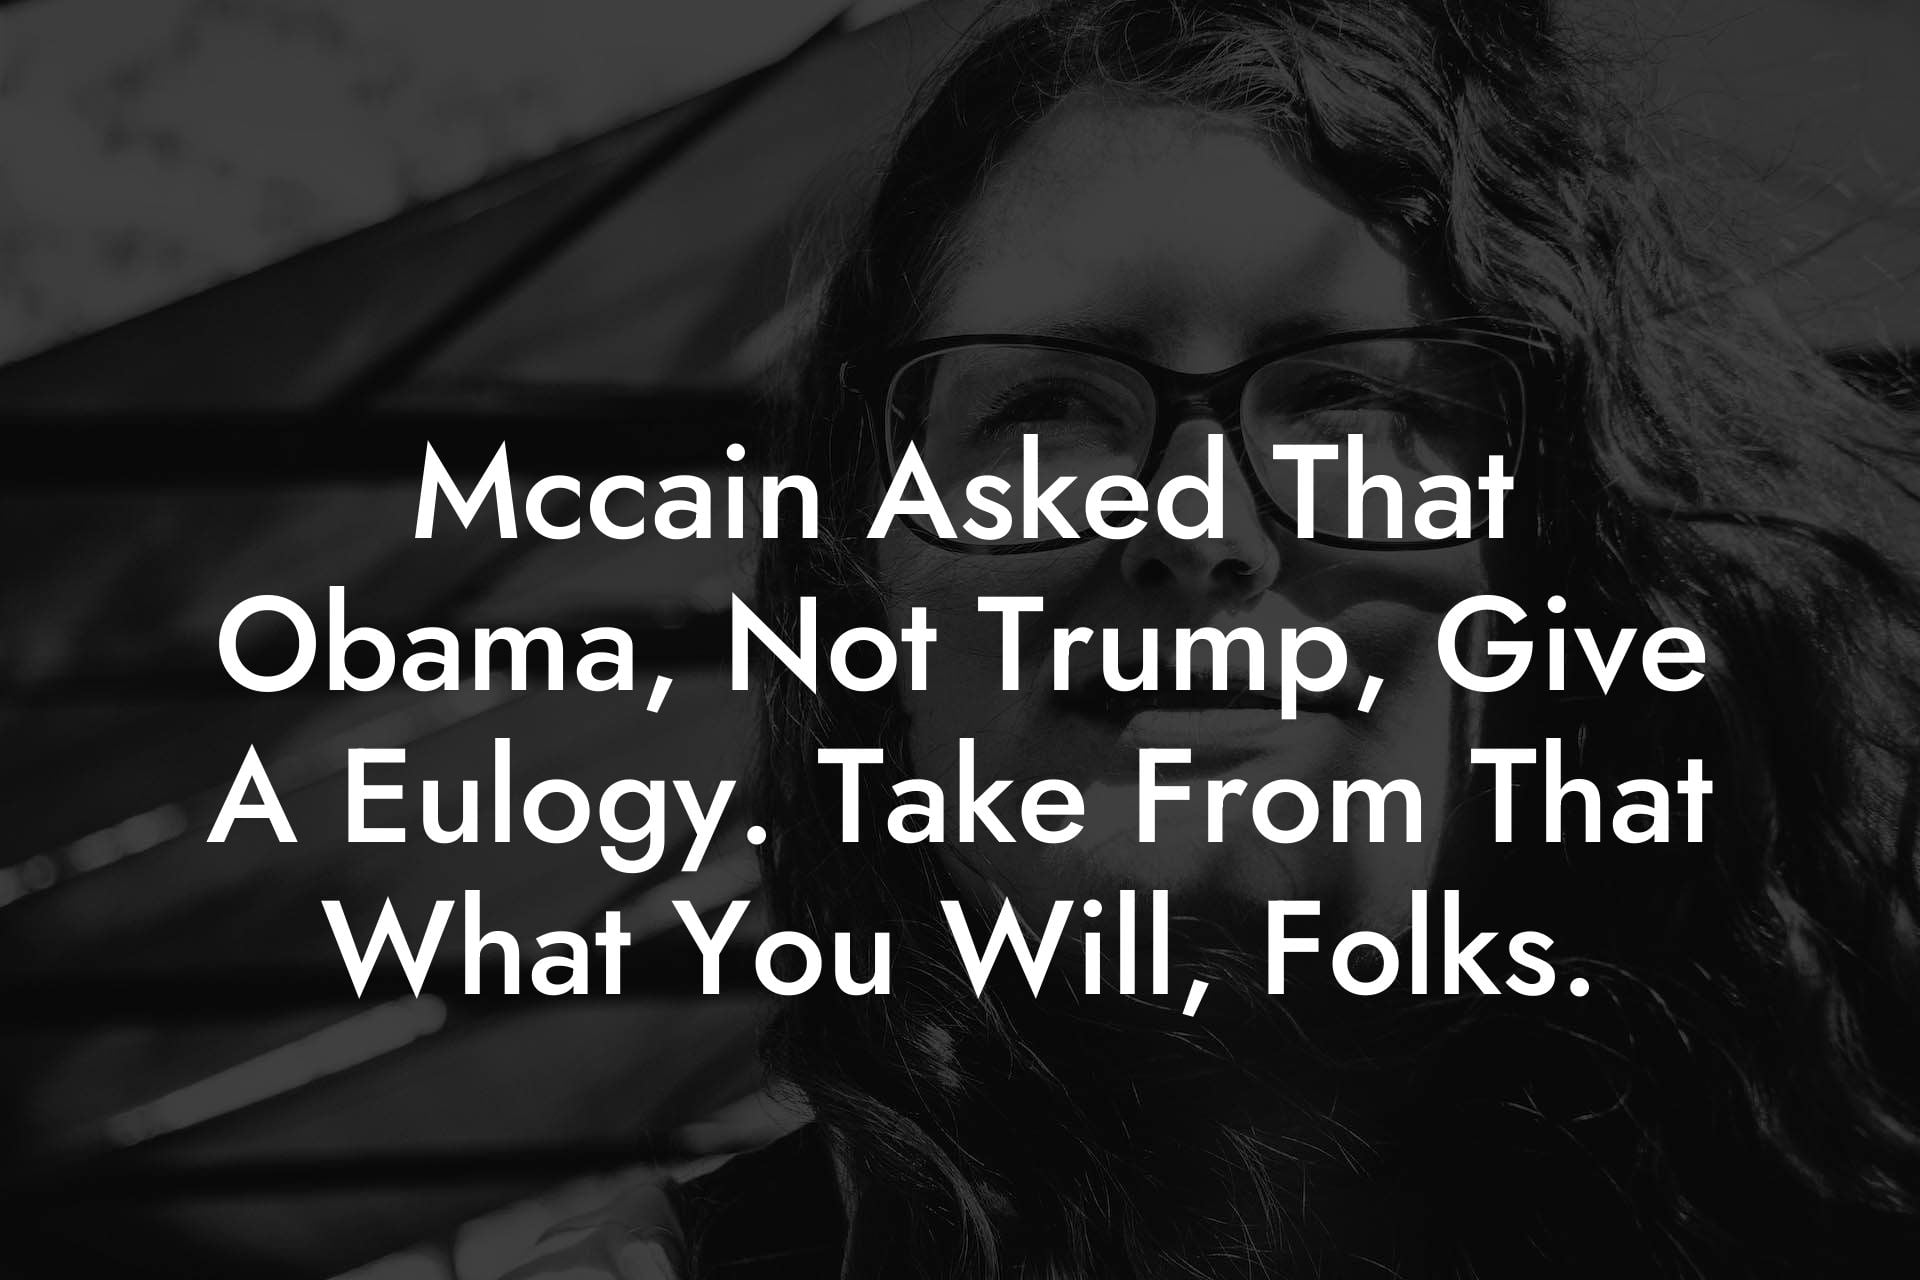 Mccain Asked That Obama, Not Trump, Give A Eulogy. Take From That What You Will, Folks.